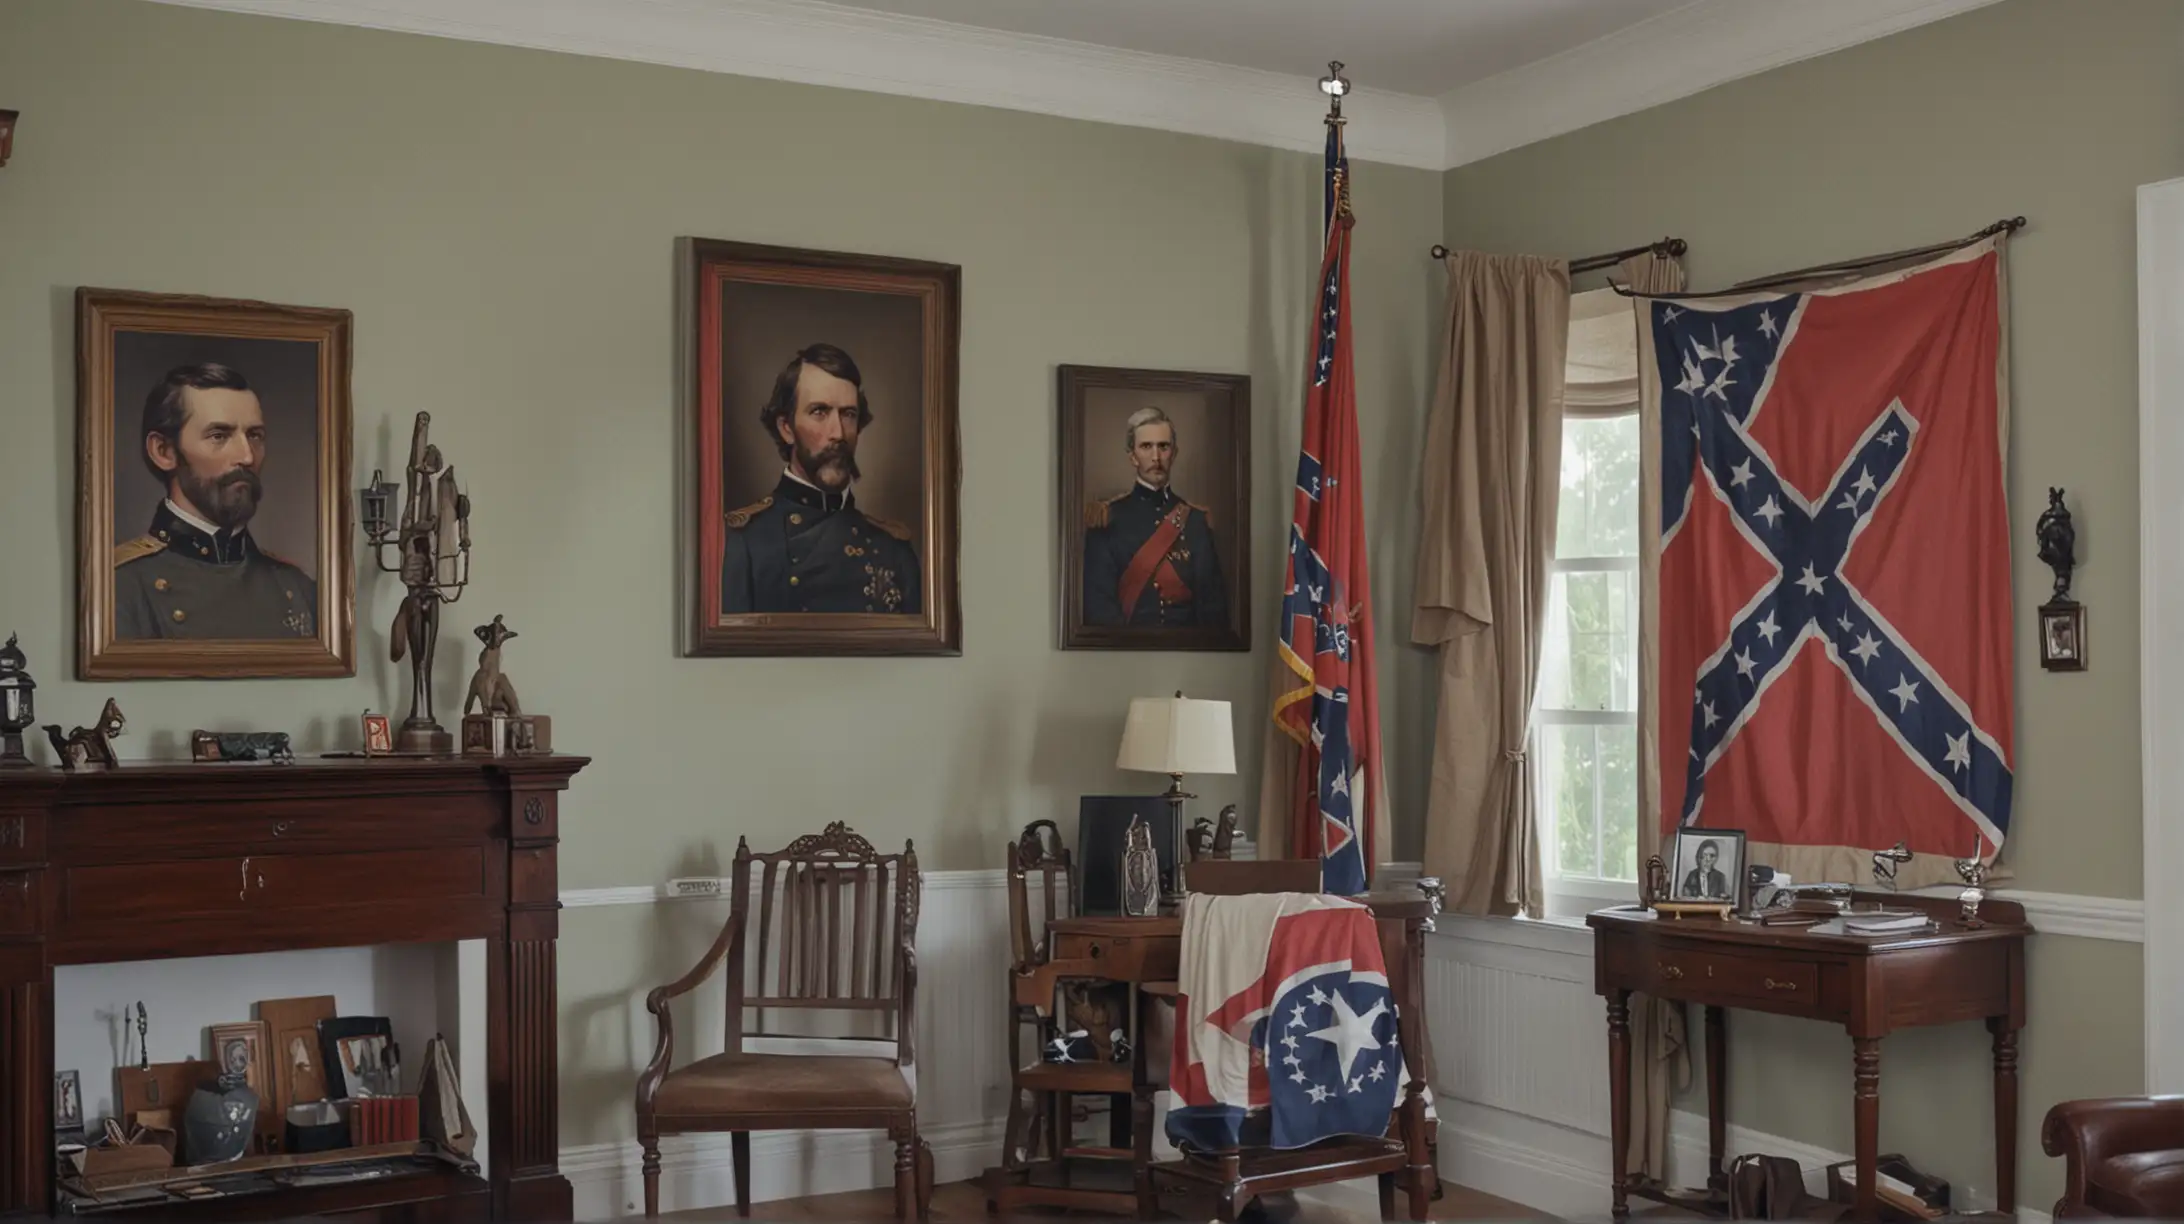 Southern Heritage Display in Suburban Home Interior